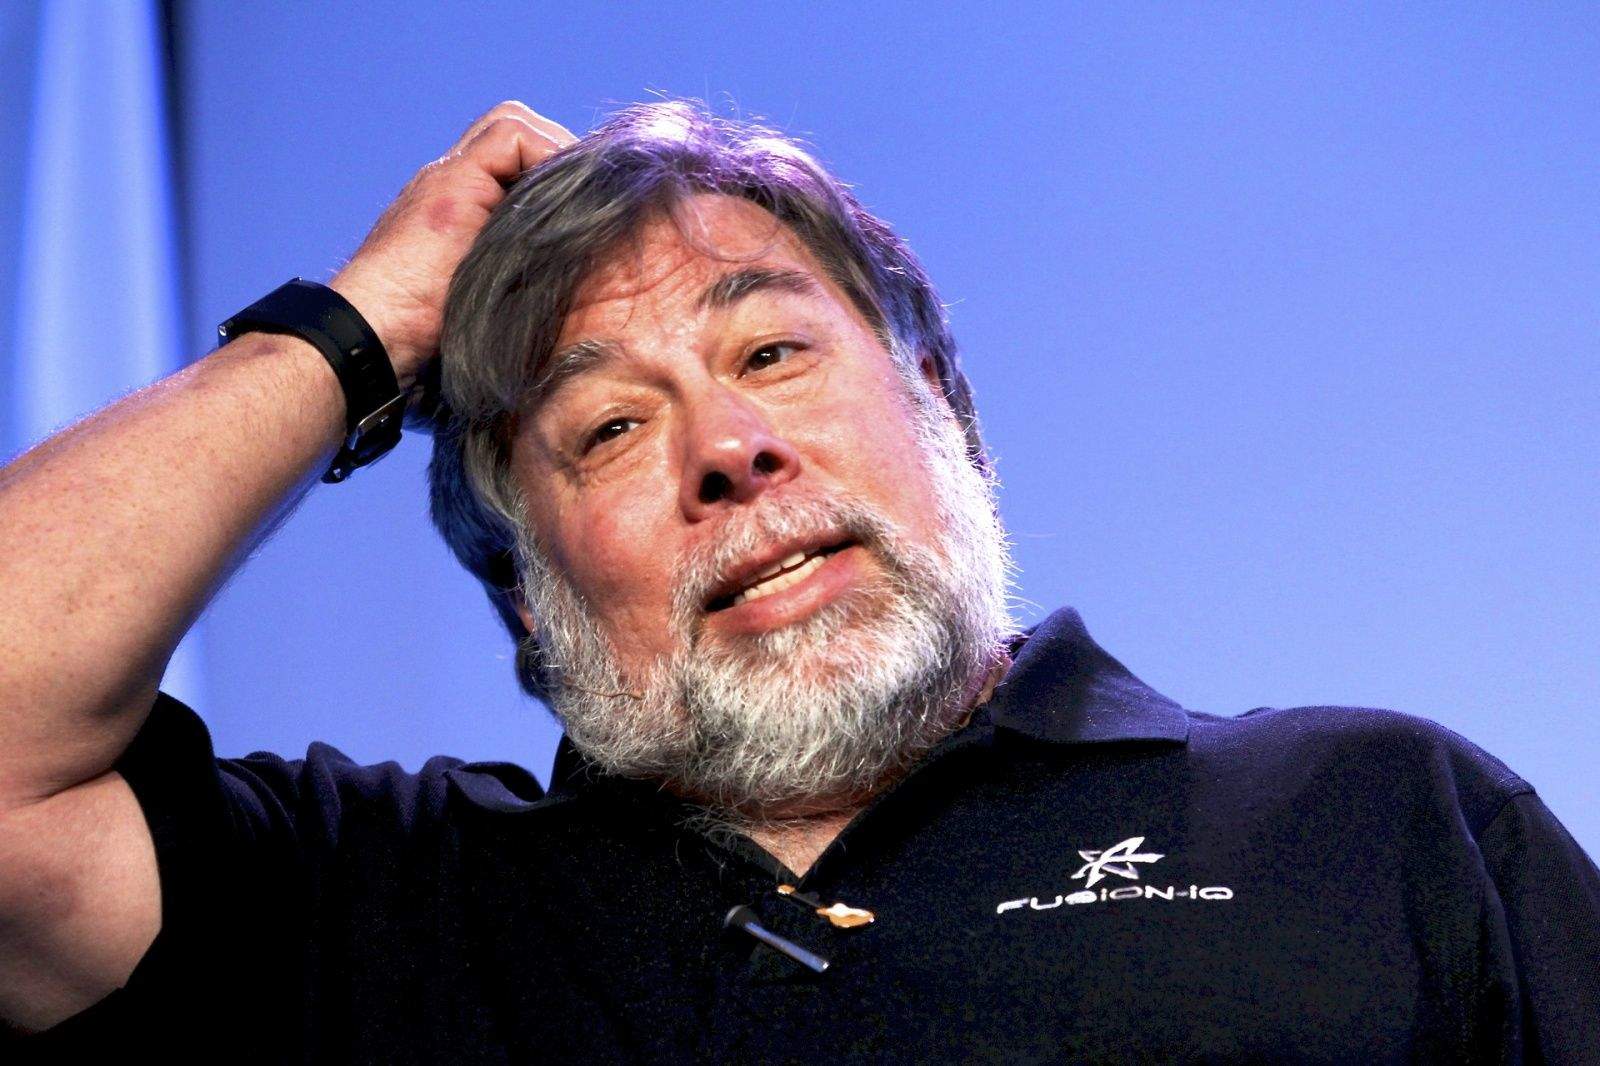 Gadget-loving Steve Wozniak sounds like he won't be queuing for the iWatch on its day of release.